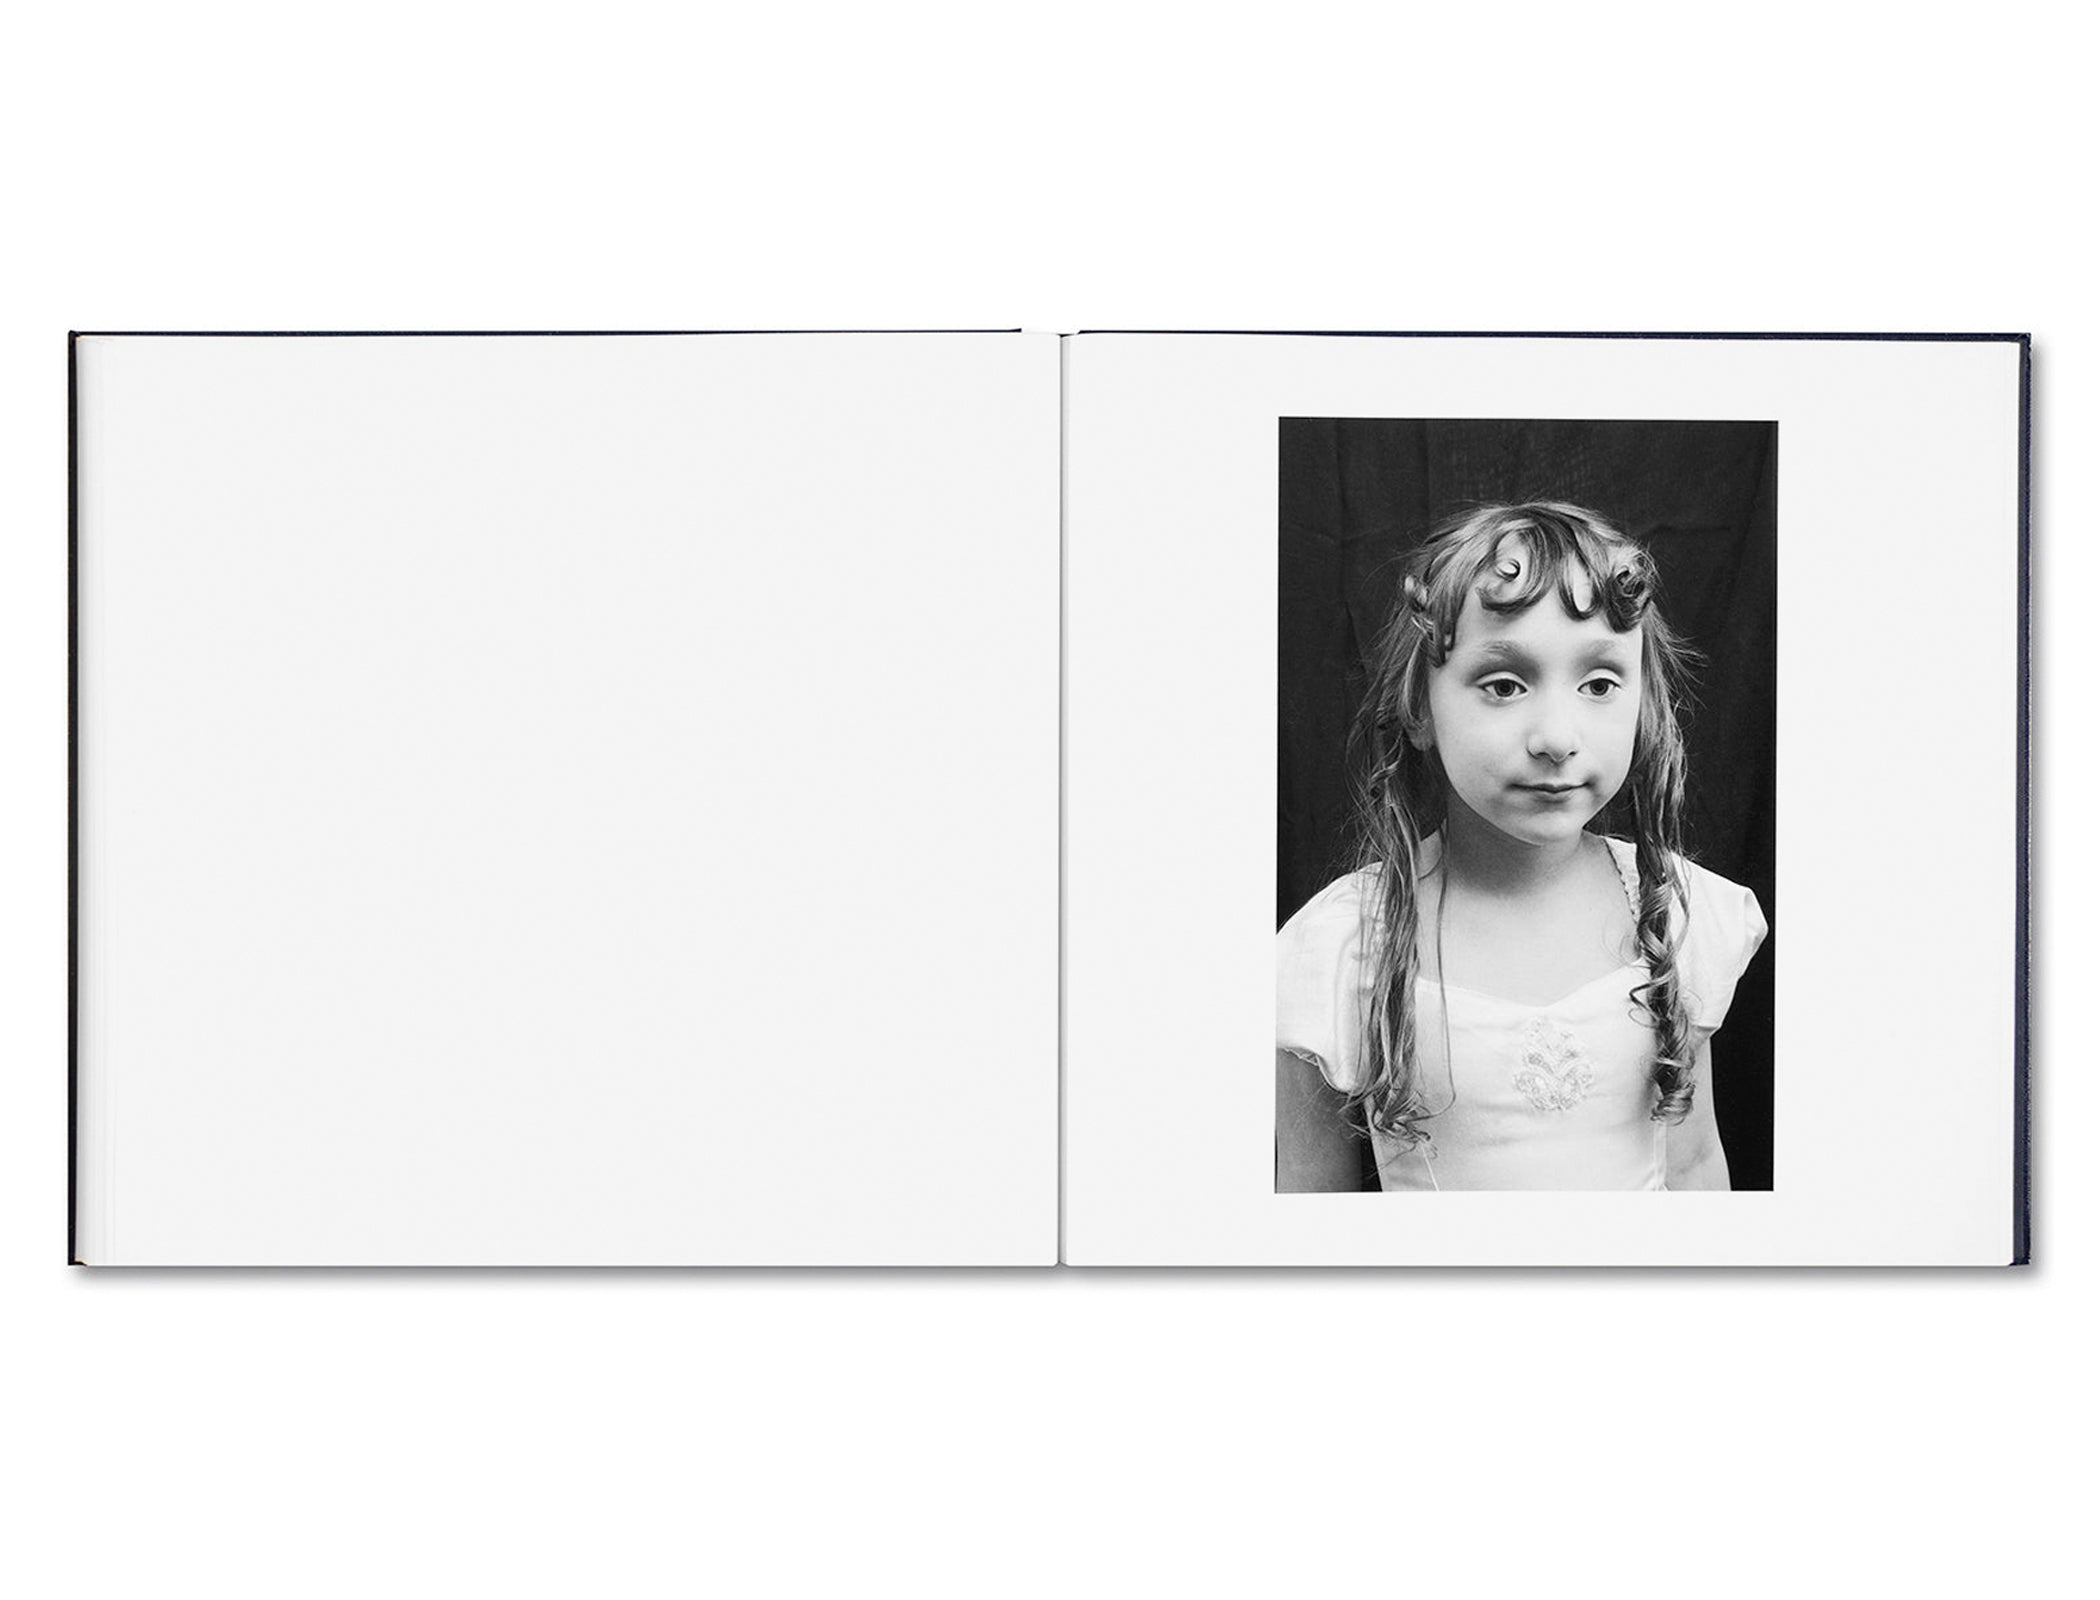 SOME SAY ICE by Alessandra Sanguinetti [SIGNED]